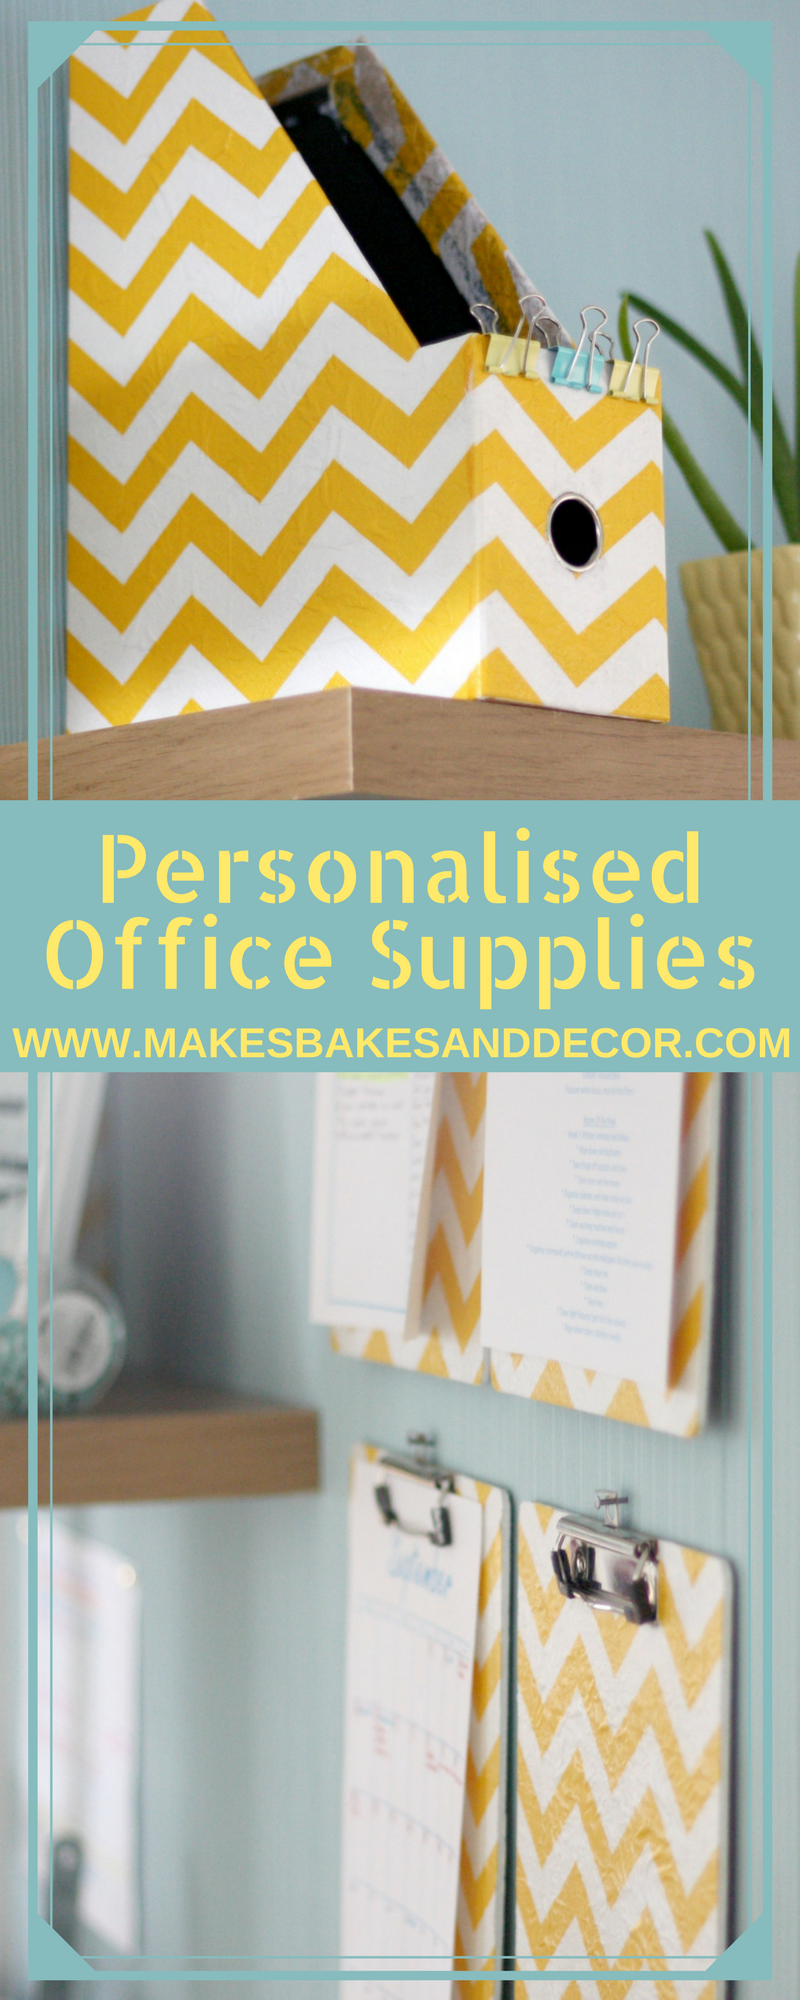 personalised office supplies